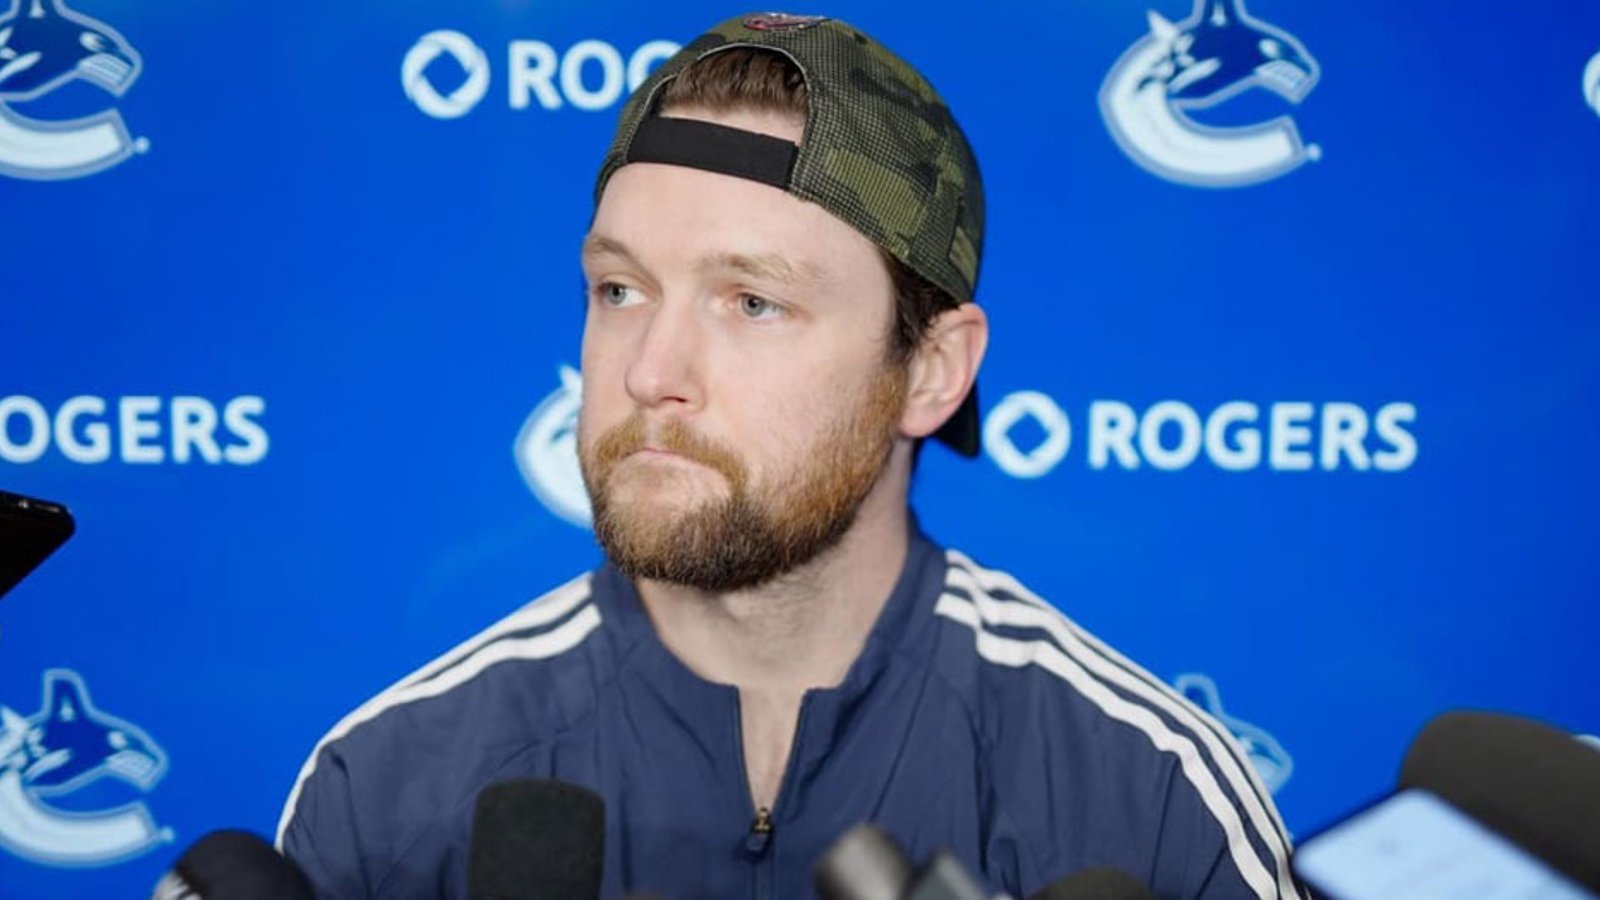 Major update on Thatcher Demko's potentially playoff ending injury